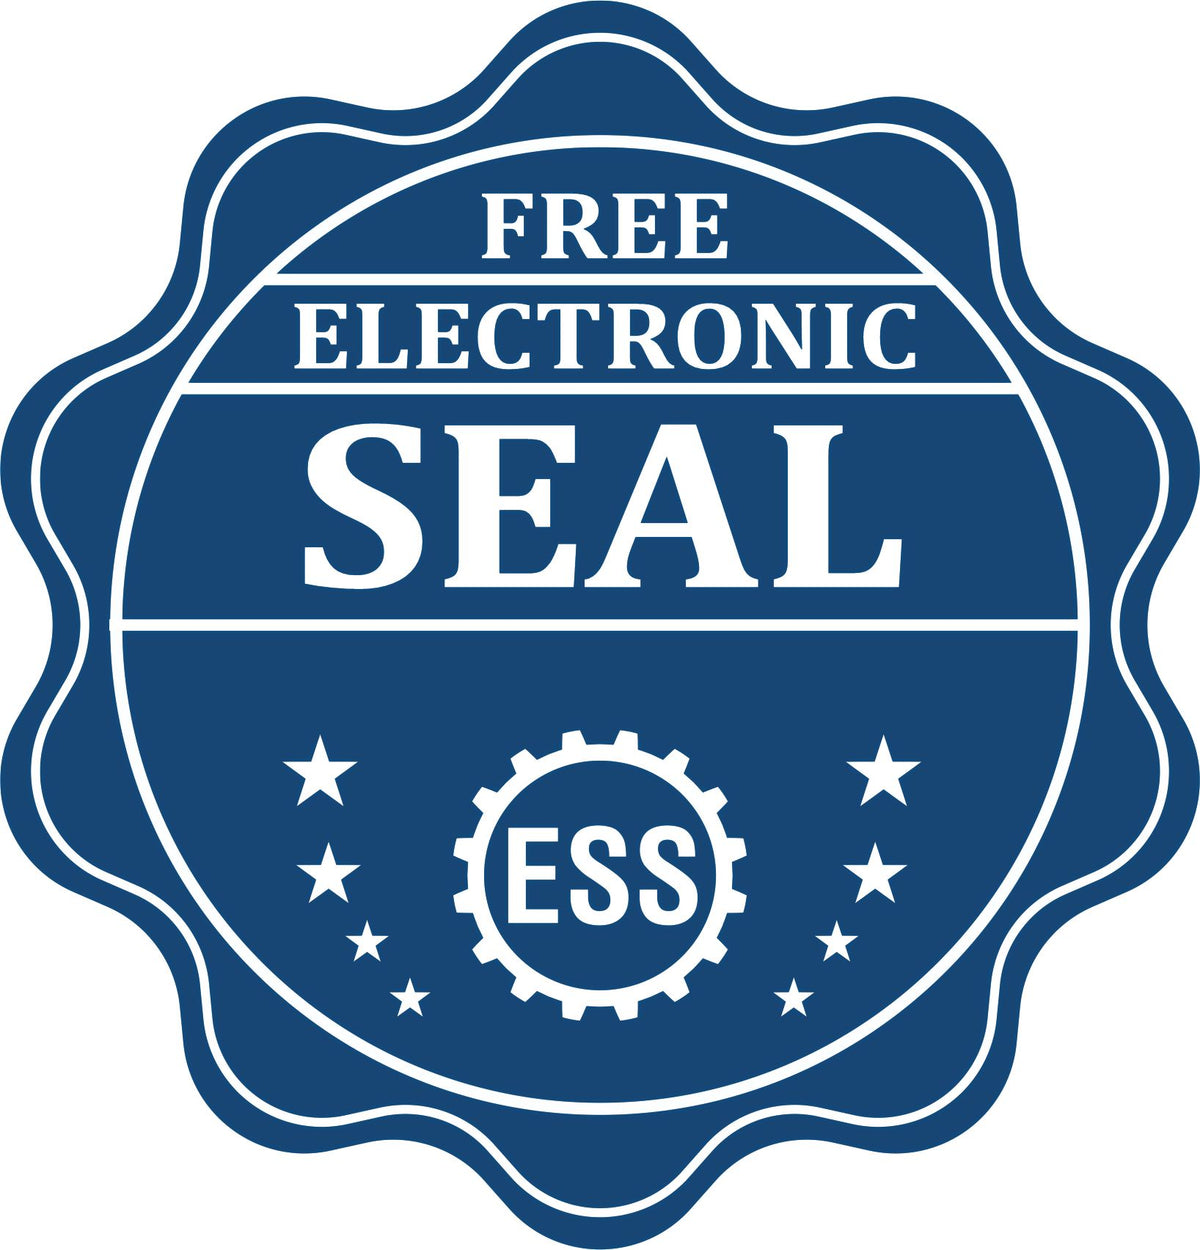 A badge showing a free electronic seal for the State of Delaware Architectural Seal Embosser with stars and the ESS gear on the emblem.